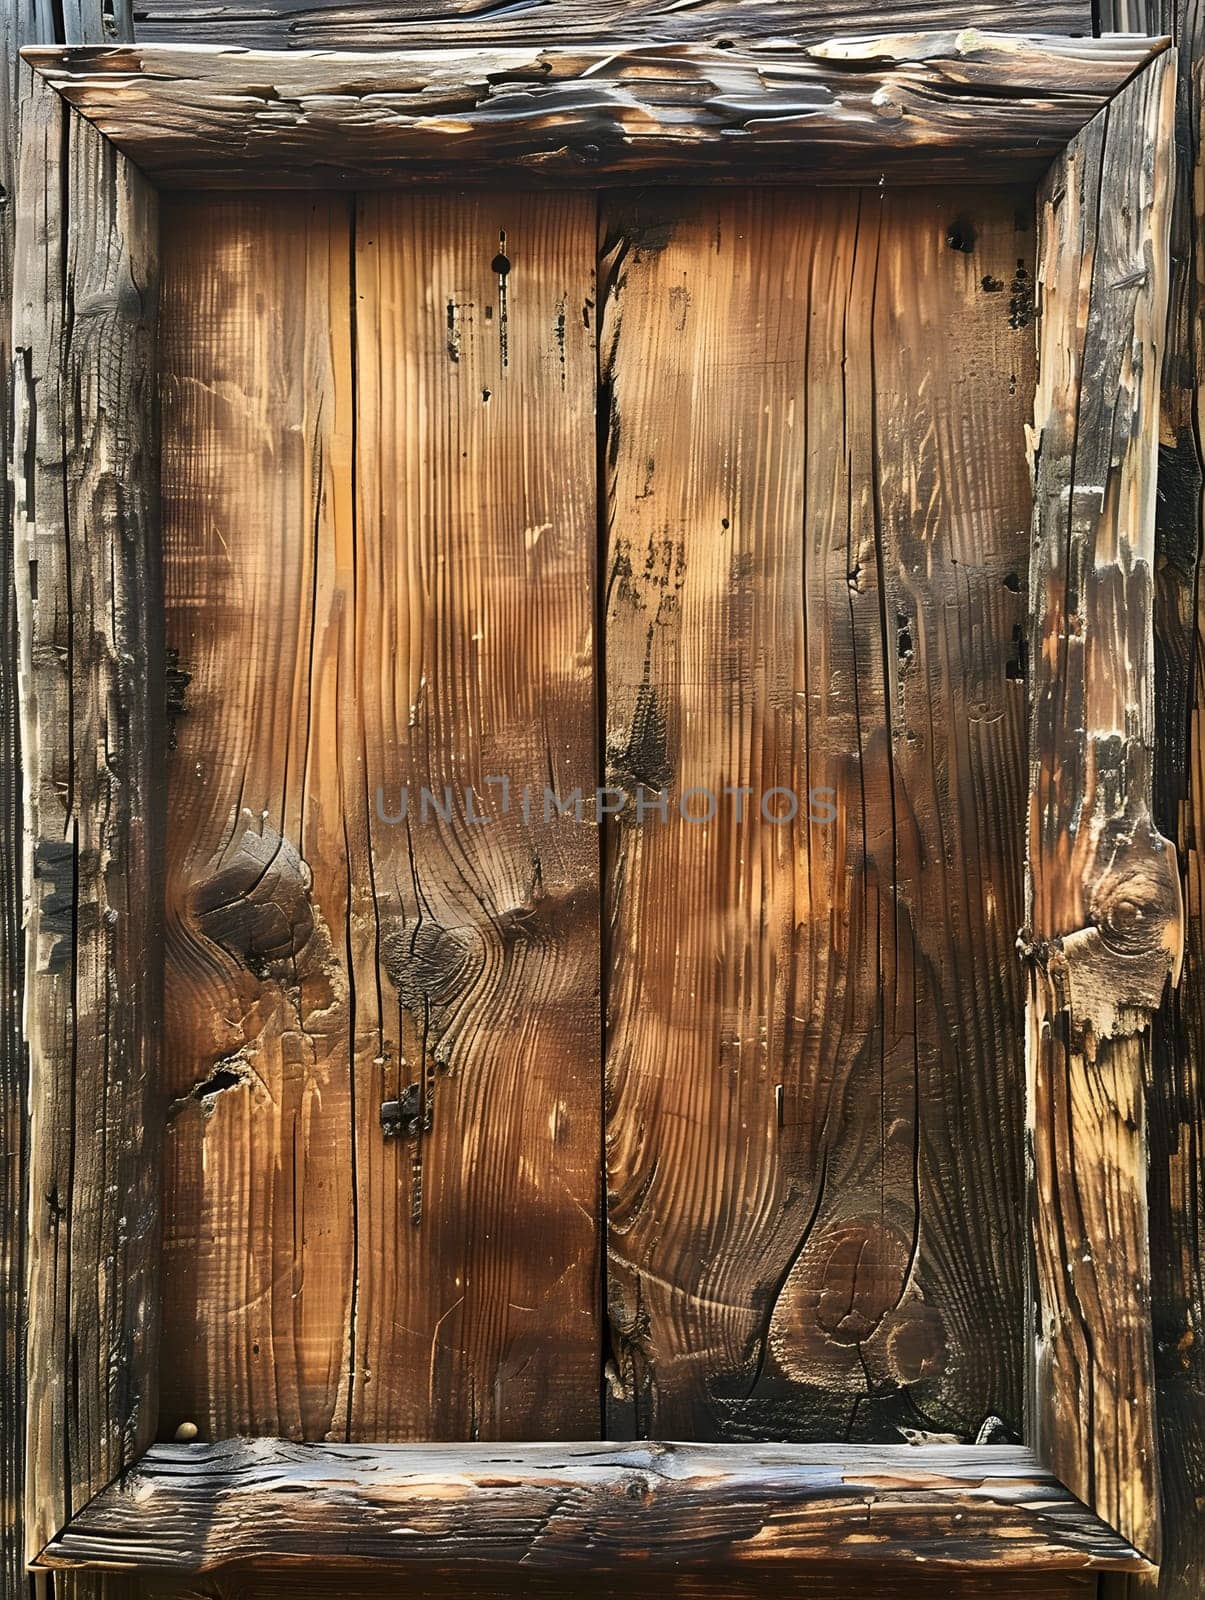 A hardwood door embedded within a wooden rectangular frame, showcasing exquisite wood stain artistry. A fixture on the buildings facade, crafted from the sturdy trunk of a tree